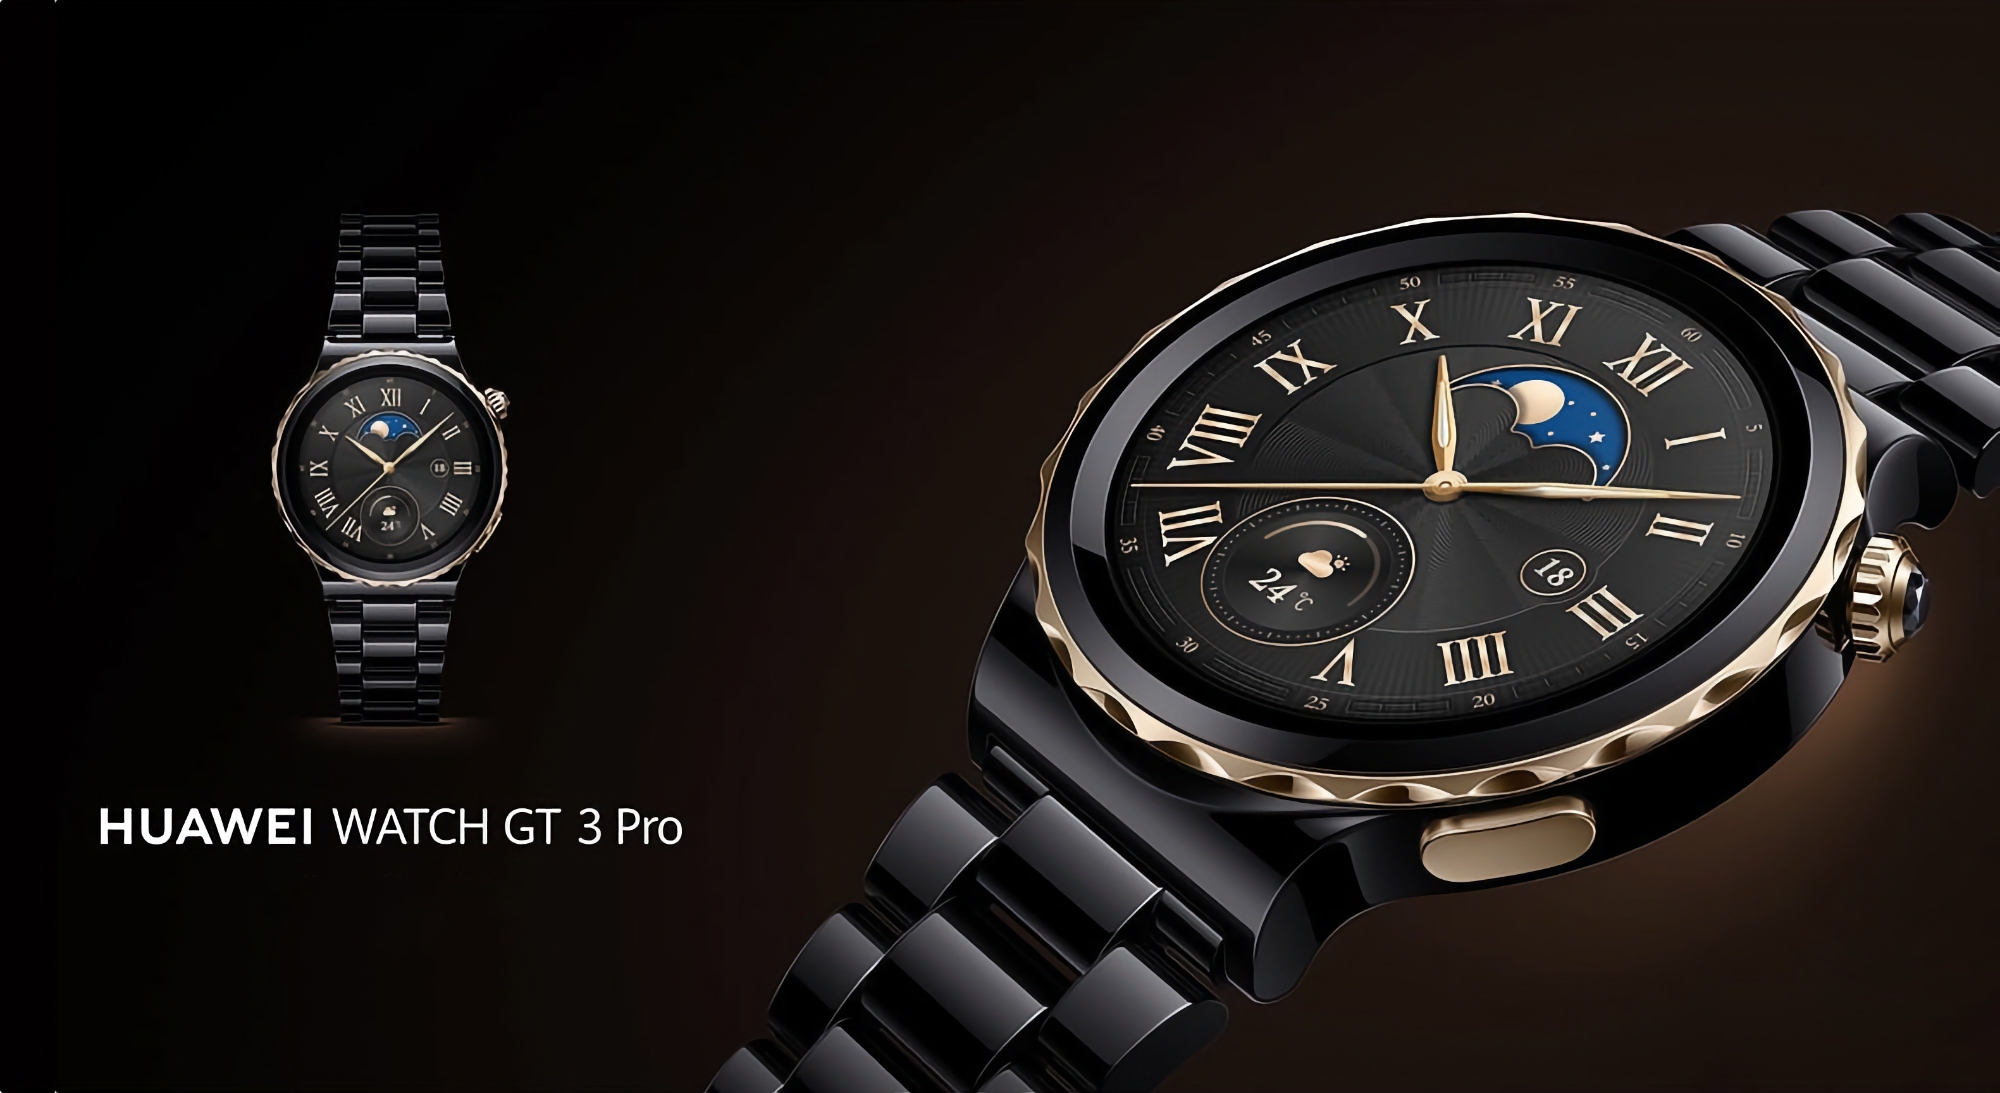 Huawei introduced a special version of the smartwatch Watch GT 3 Pro with a black ceramic case